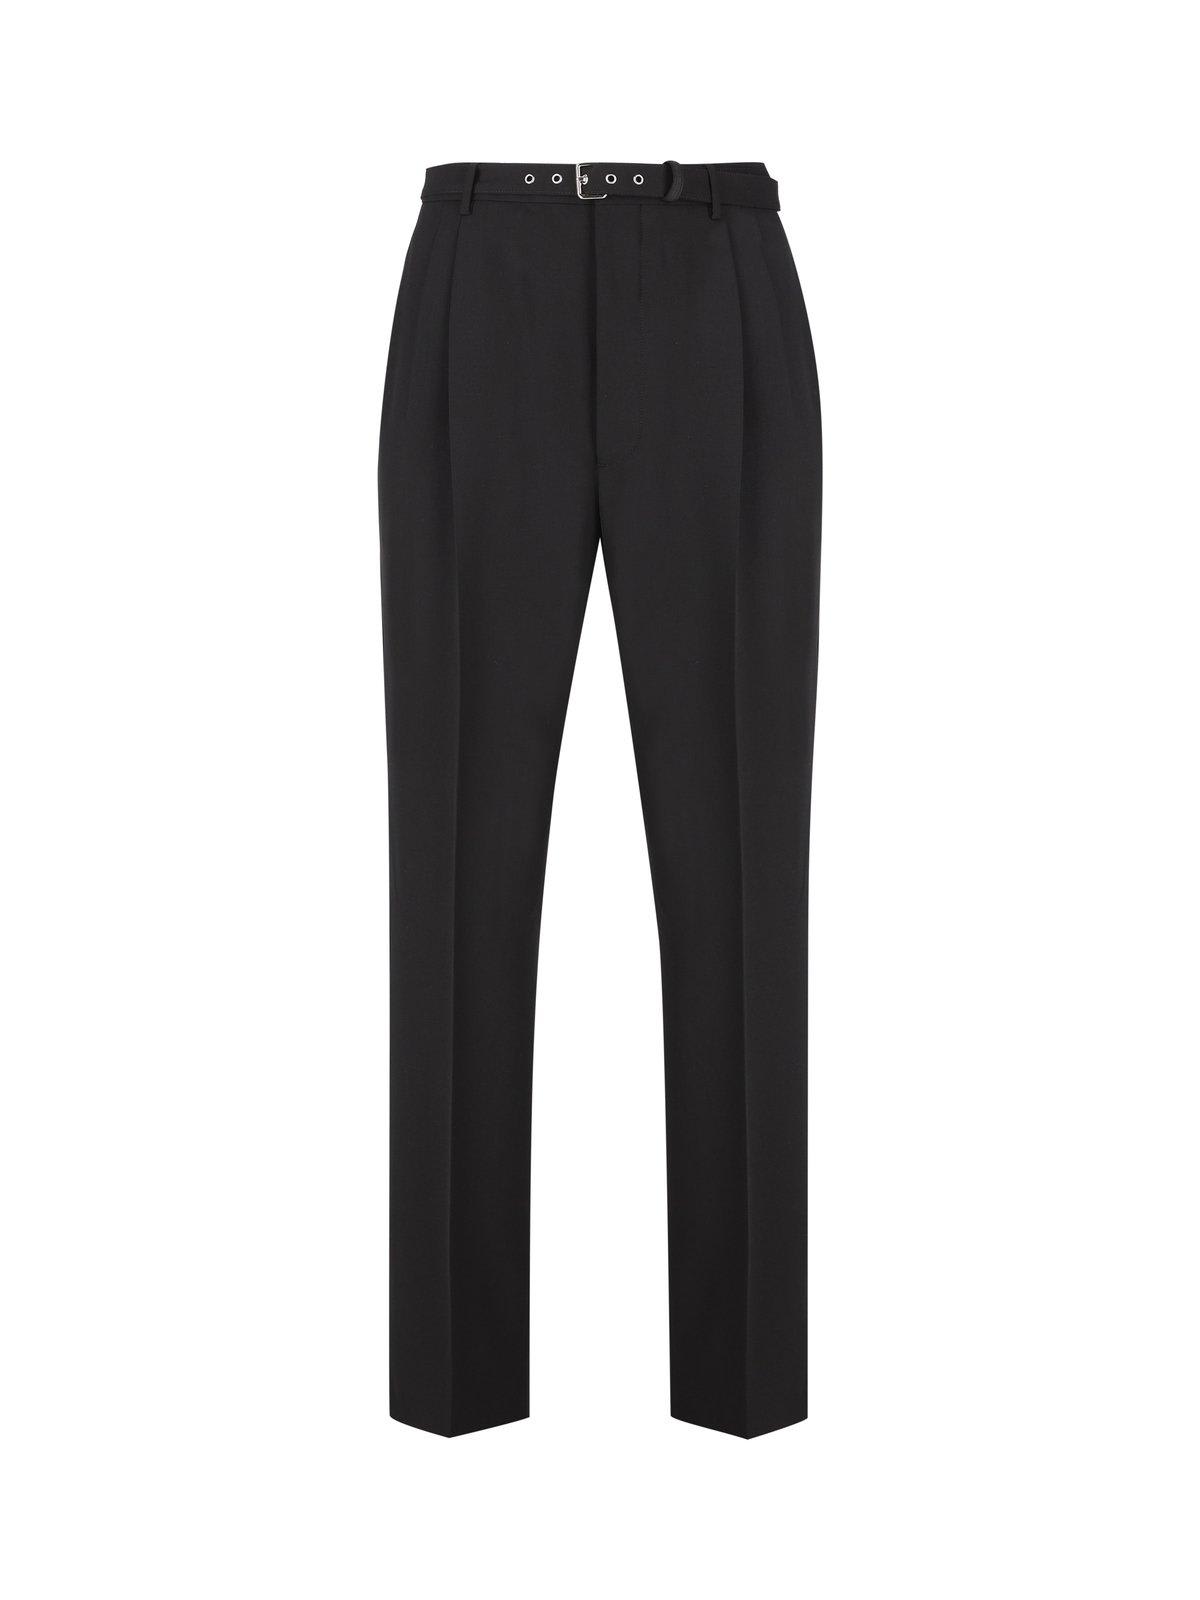 Prada Belted Tailored Trousers In Black